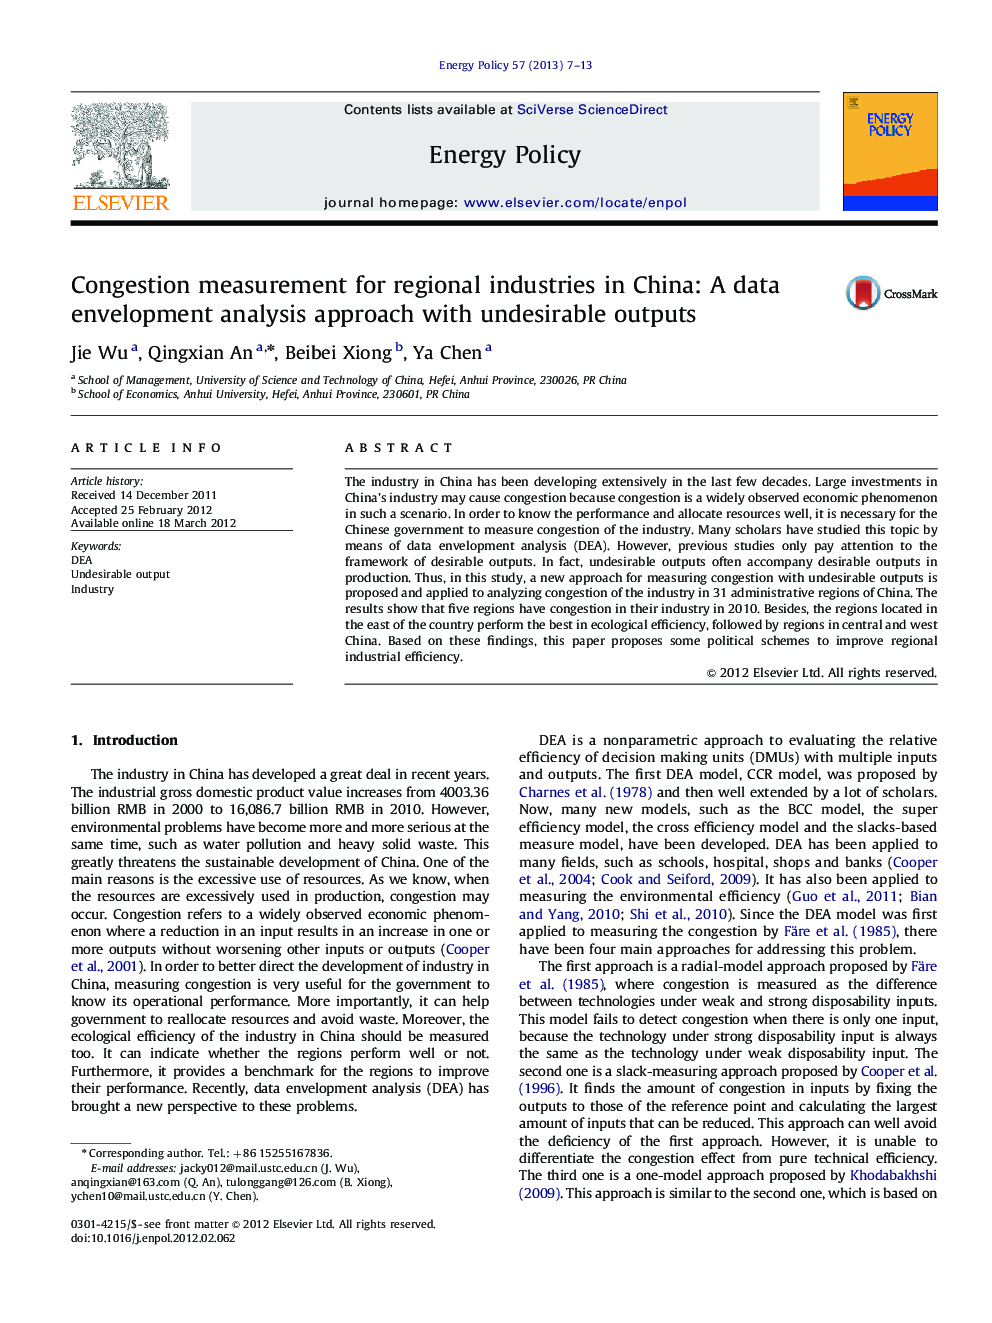 Congestion measurement for regional industries in China: A data envelopment analysis approach with undesirable outputs